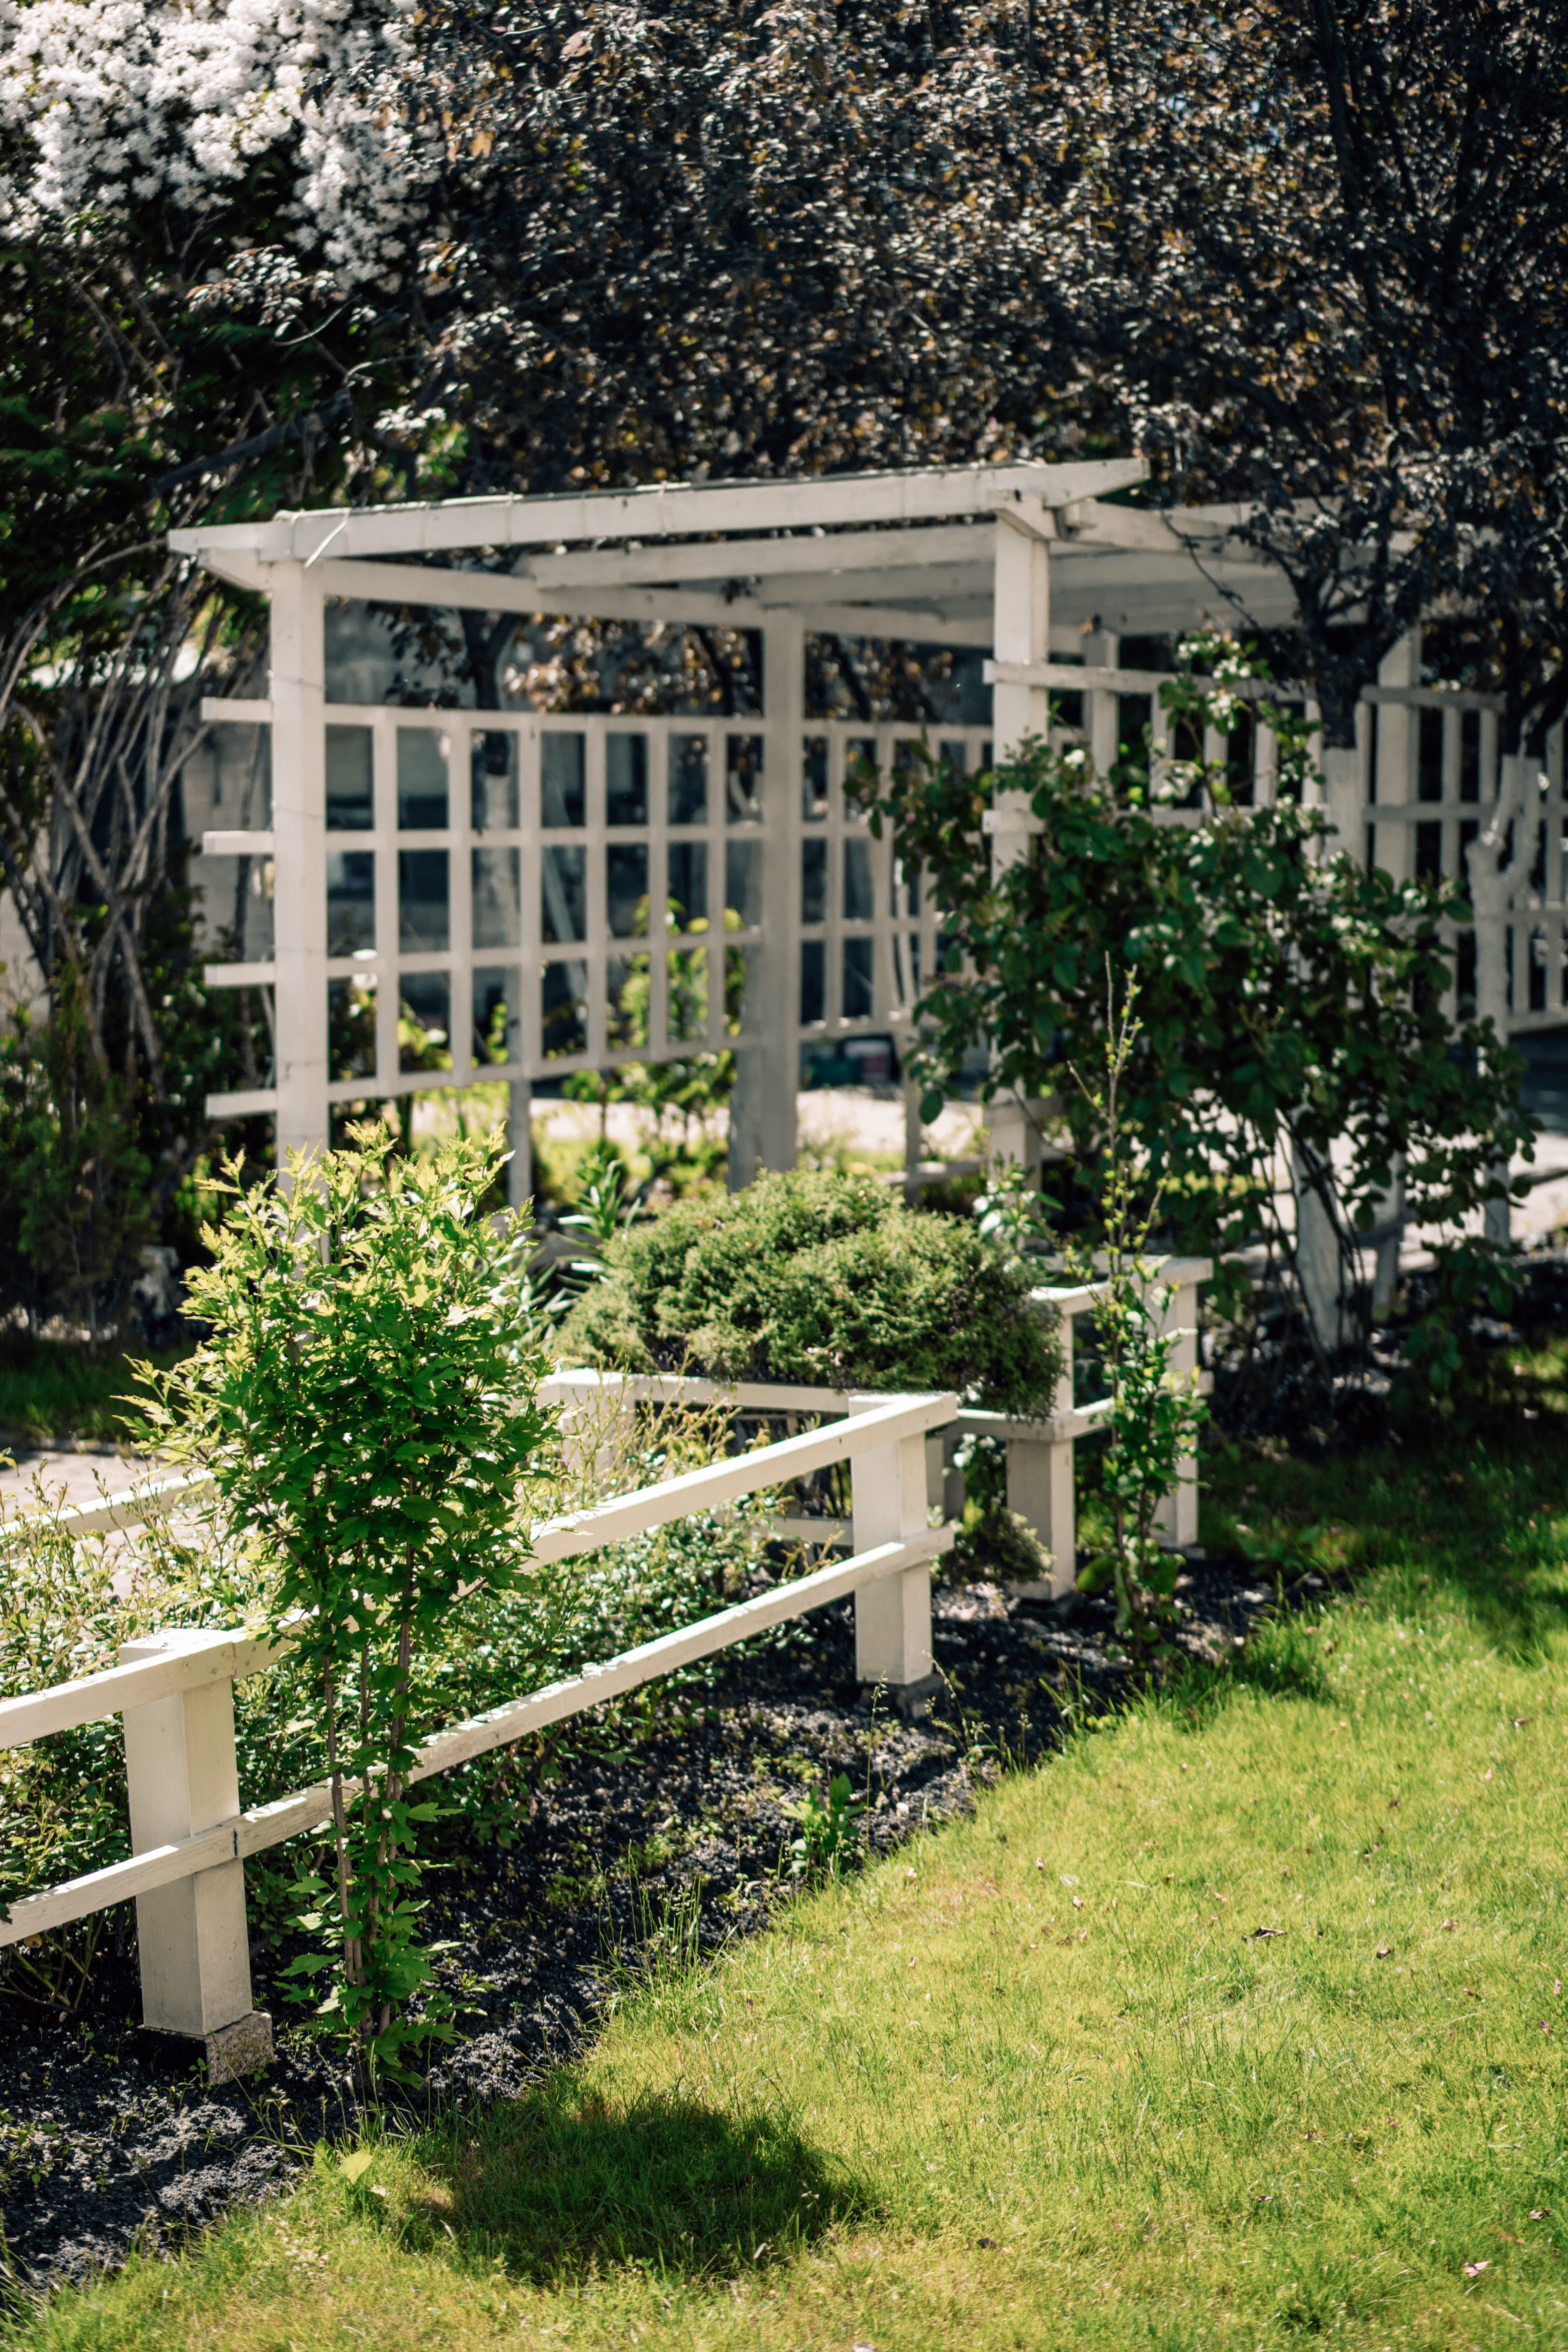 White tall fencing with trellis